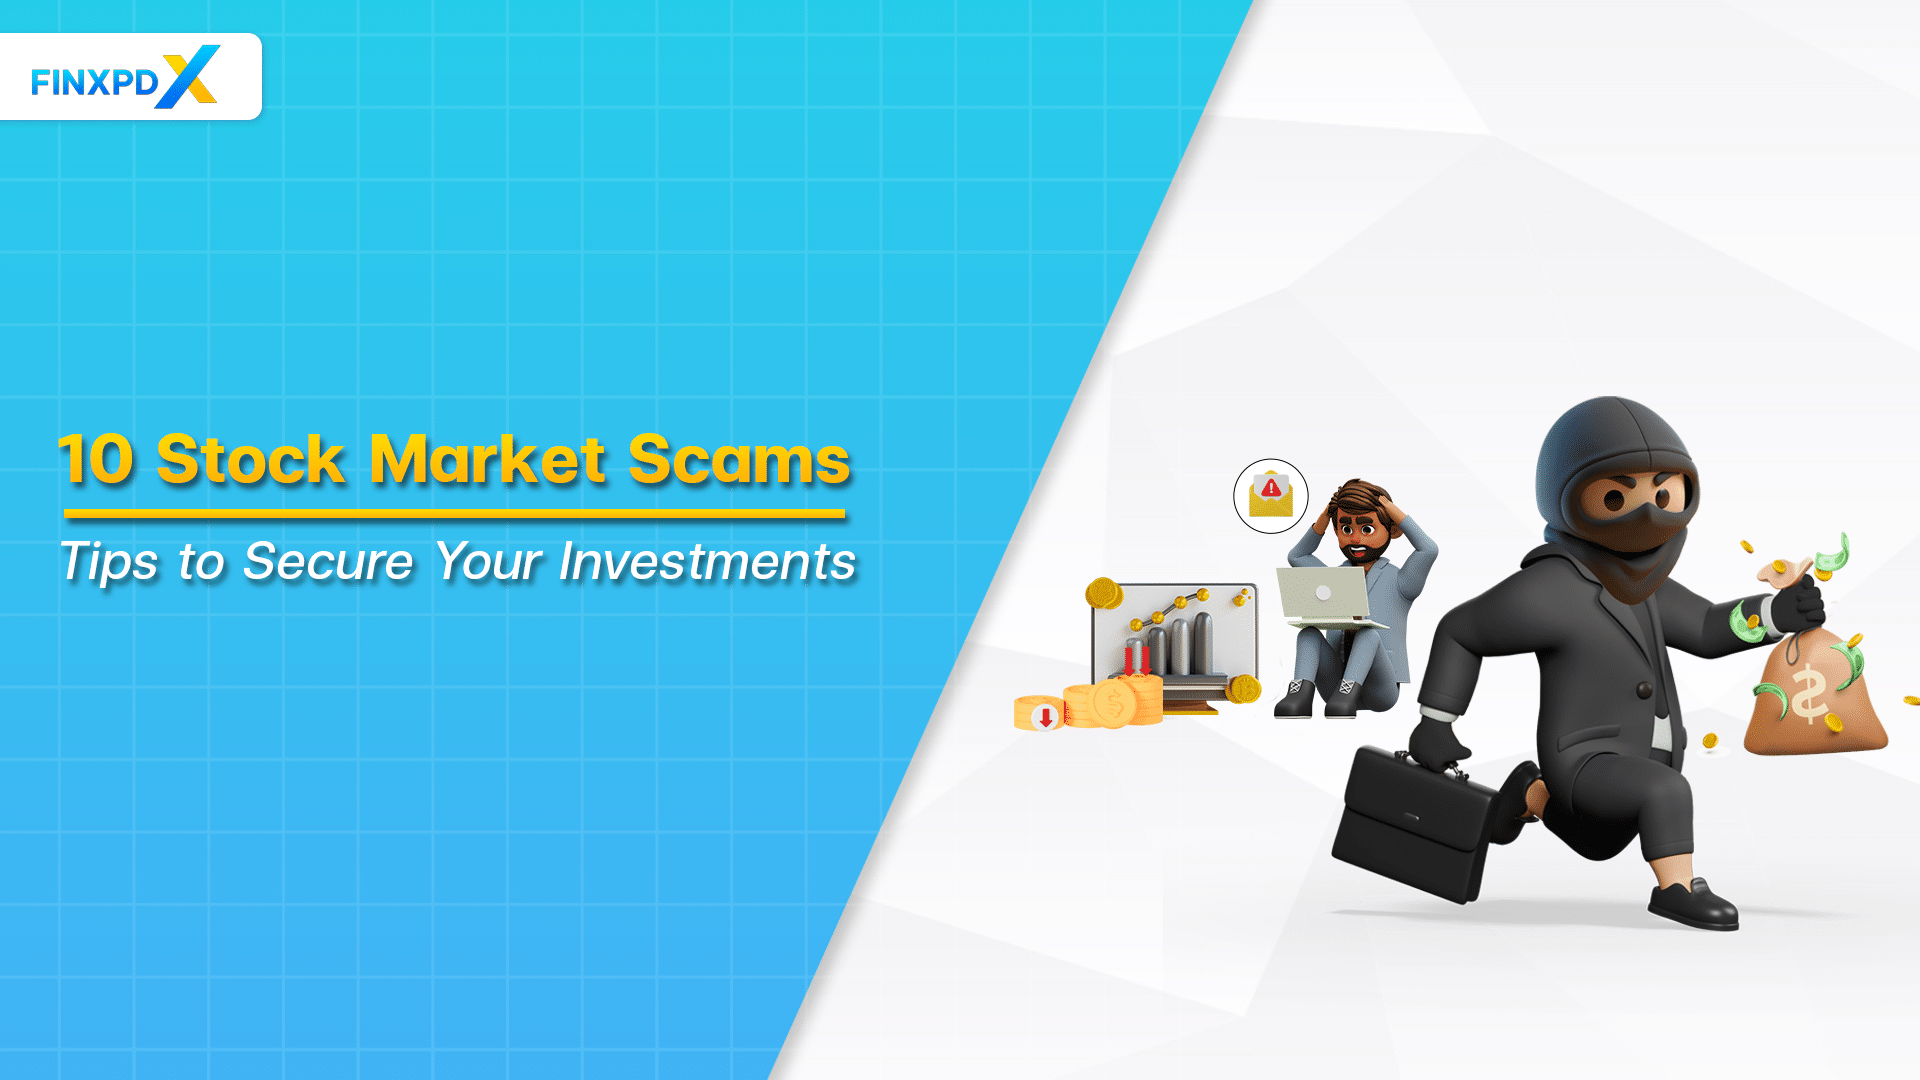 10 Stock Market Scams: Tips to Secure Your Investments